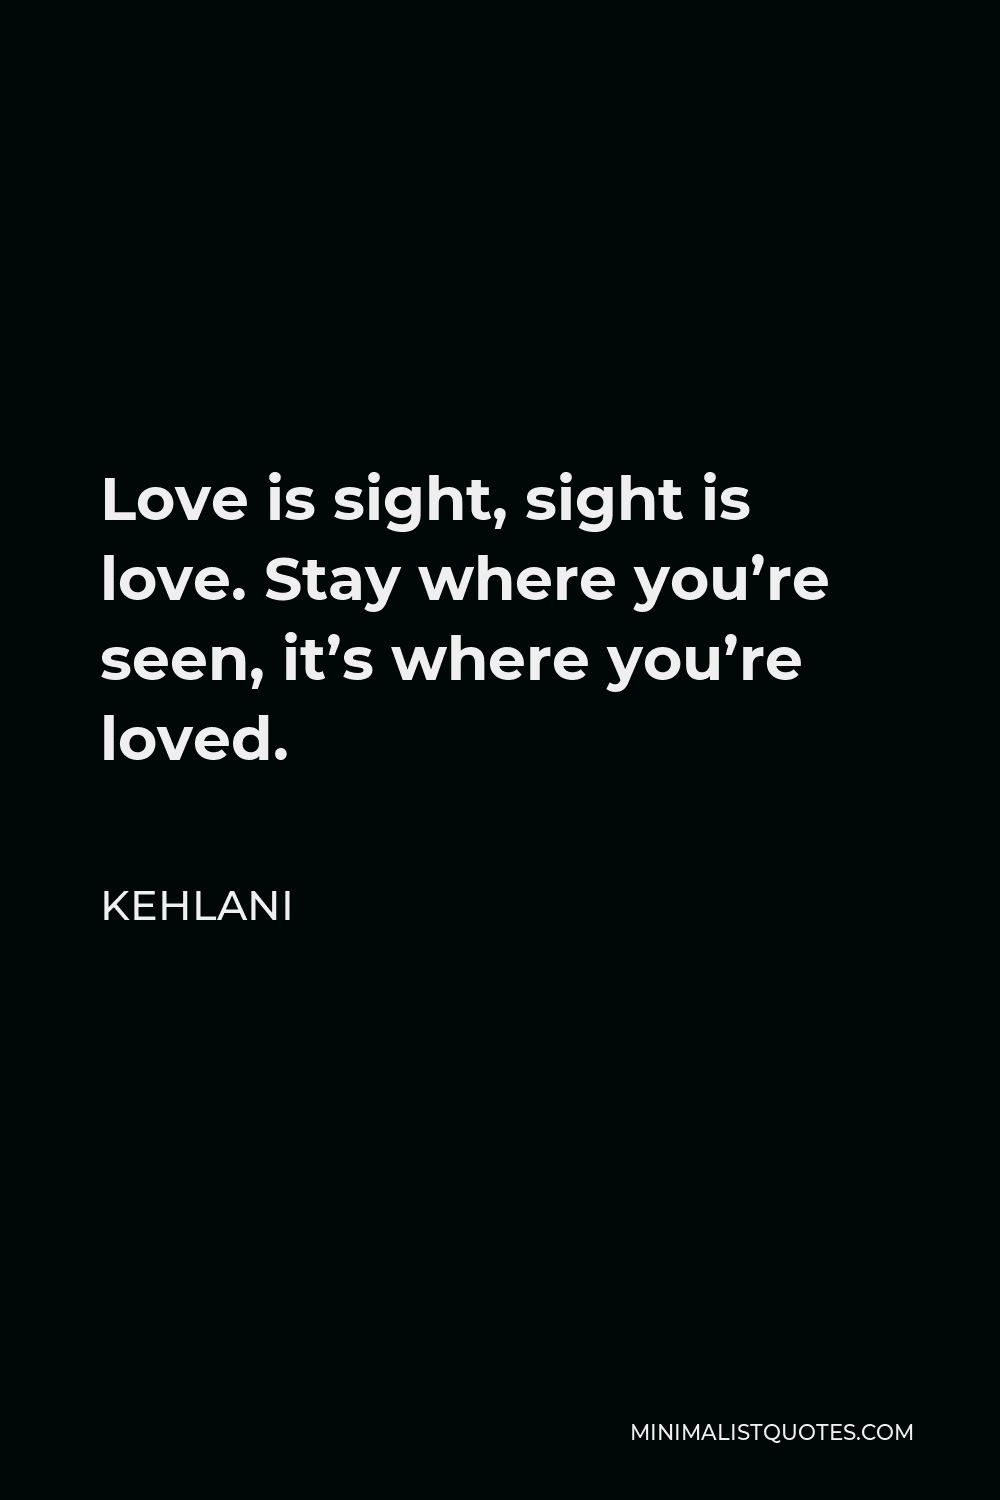 Kehlani Quote: Love is sight, sight is love. Stay where you’re seen, it ...